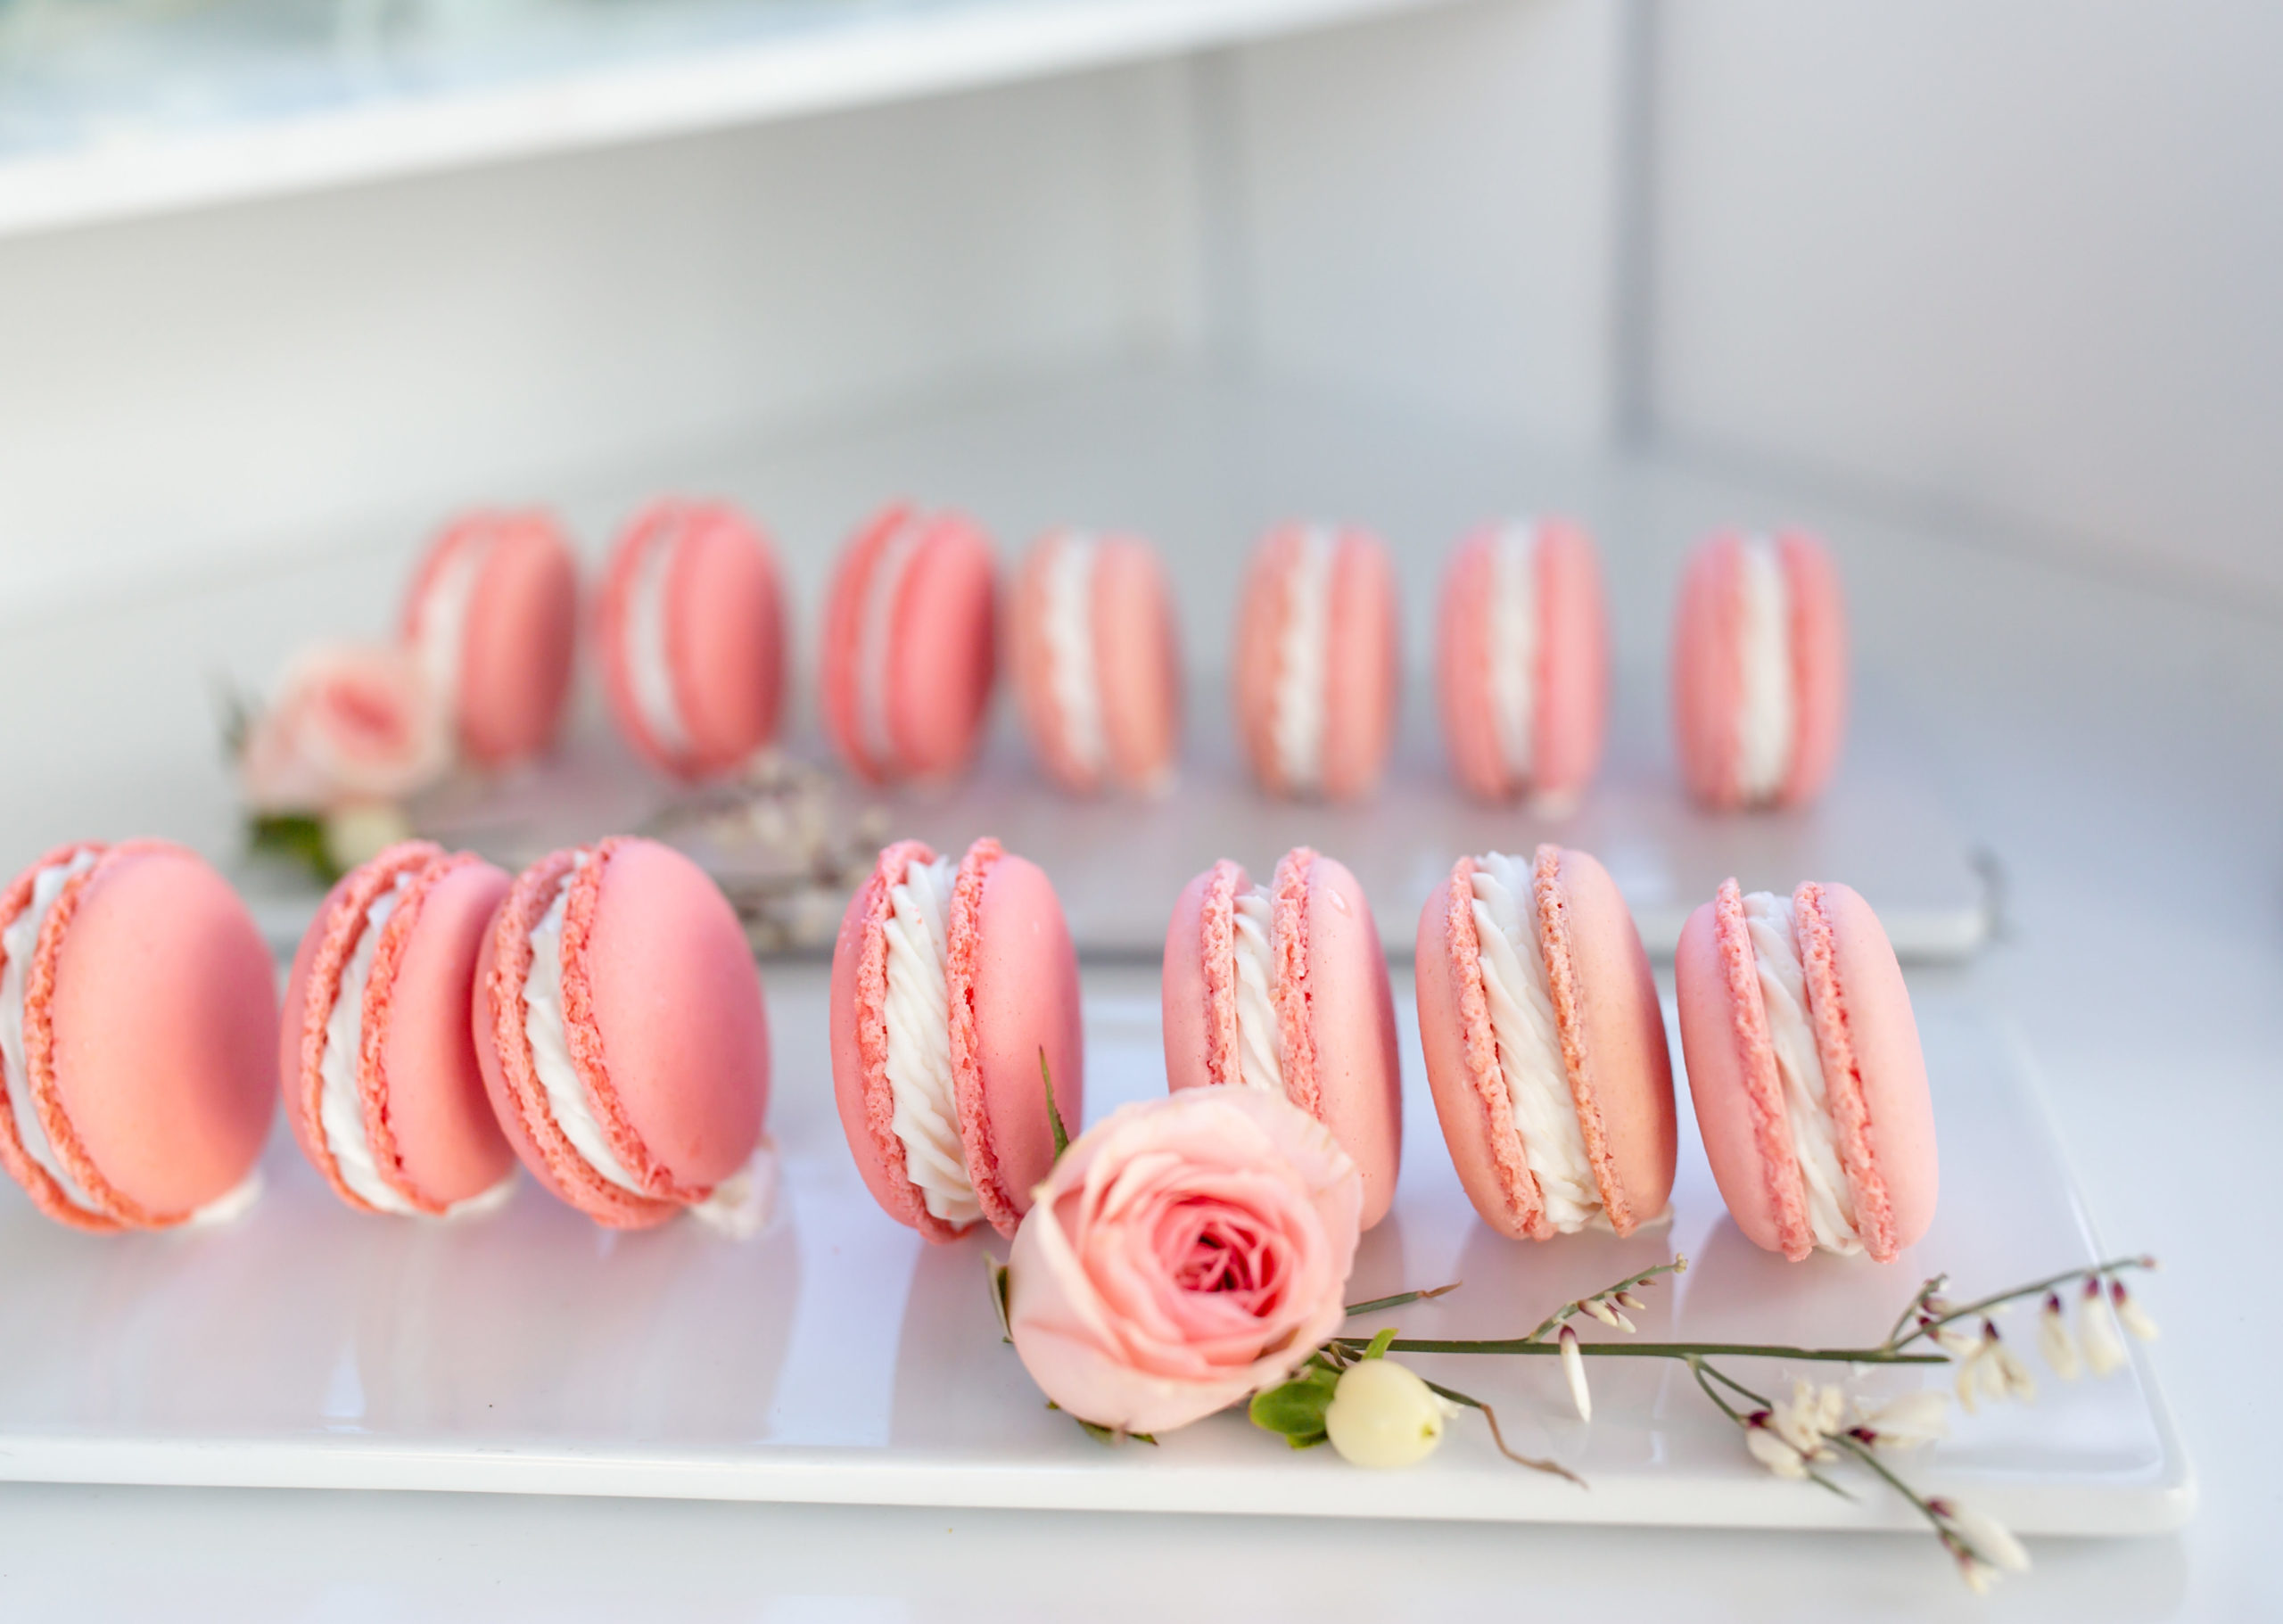 Wedding cake alternatives - pink french macarons with fresh florals